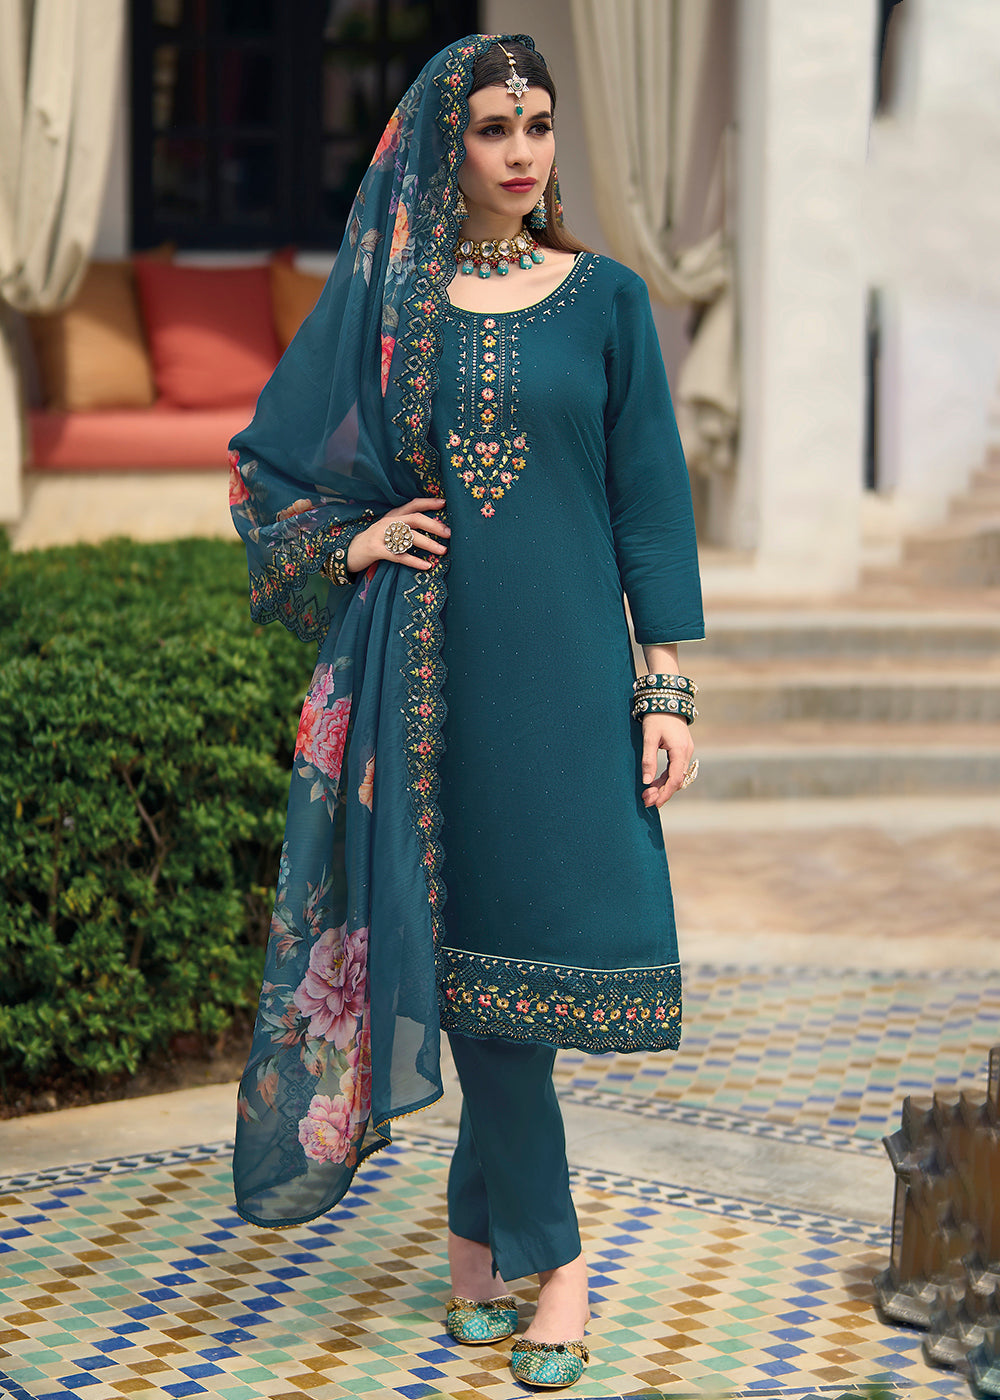 Buy Now Viscose Silk Teal Blue Pakistani Pant Style Salwar Suit Online in USA, UK, Canada, Germany, Australia & Worldwide at Empress Clothing.